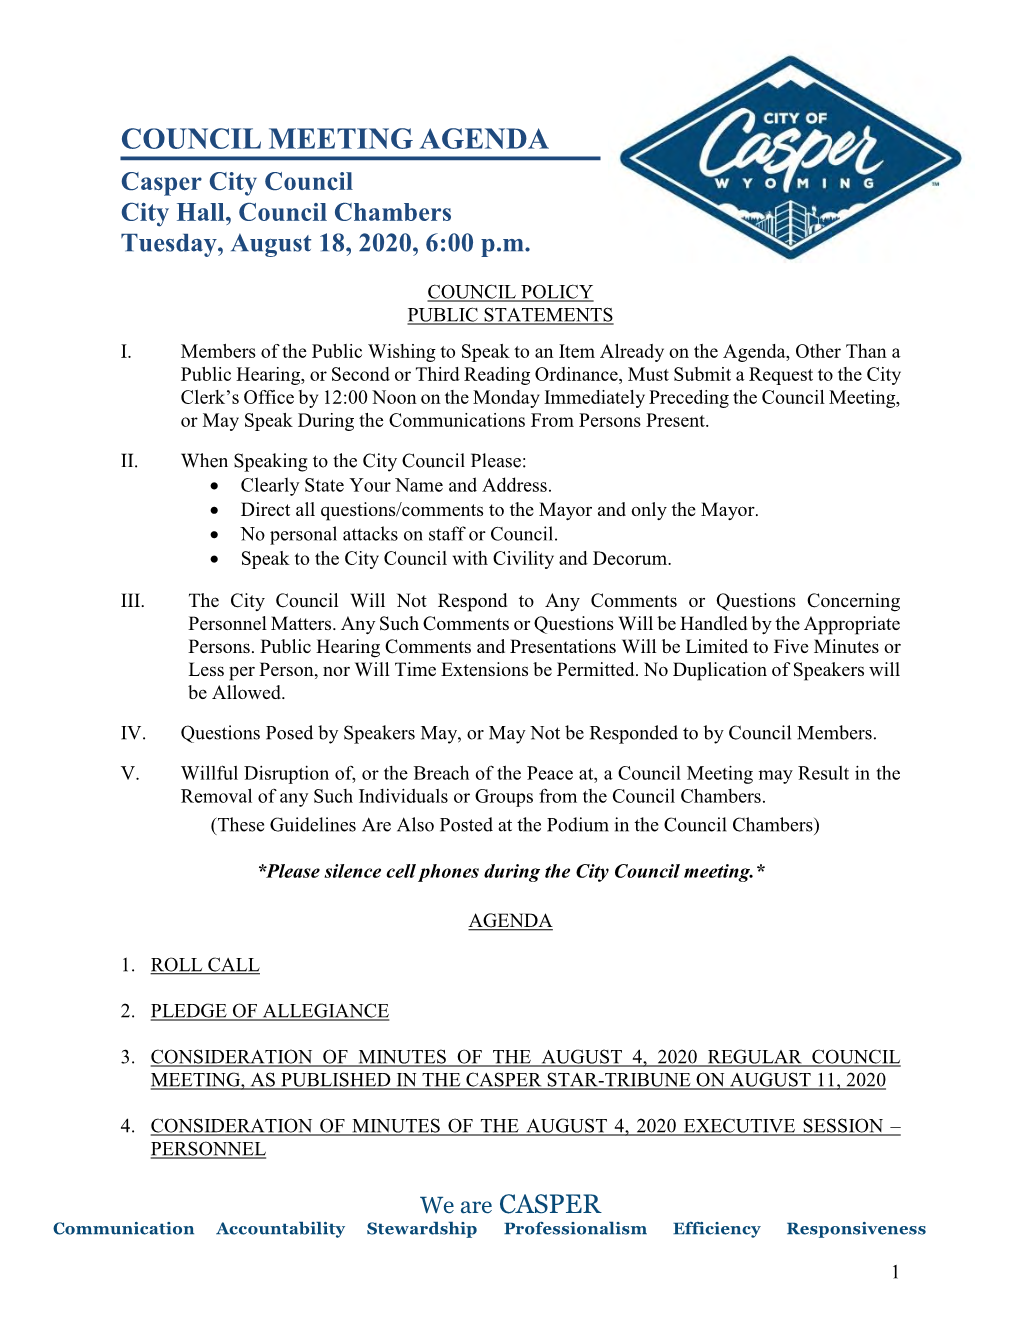 COUNCIL MEETING AGENDA Casper City Council City Hall, Council Chambers Tuesday, August 18, 2020, 6:00 P.M